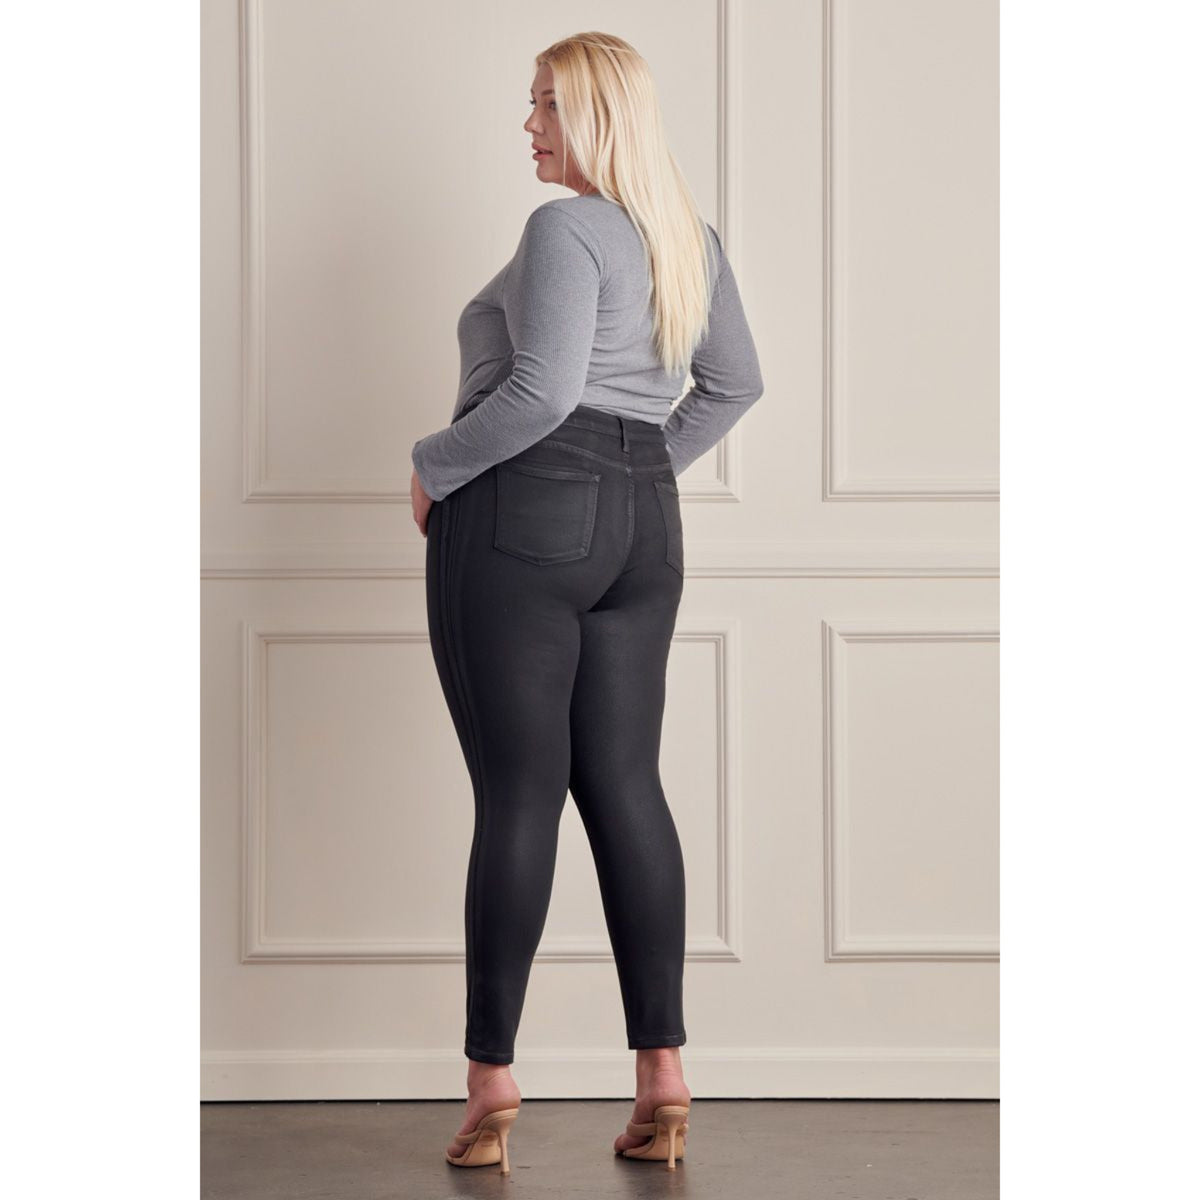 Plus Mid Rise Coated Super Skinny Jeans- Black - SLATE Boutique & Gifts